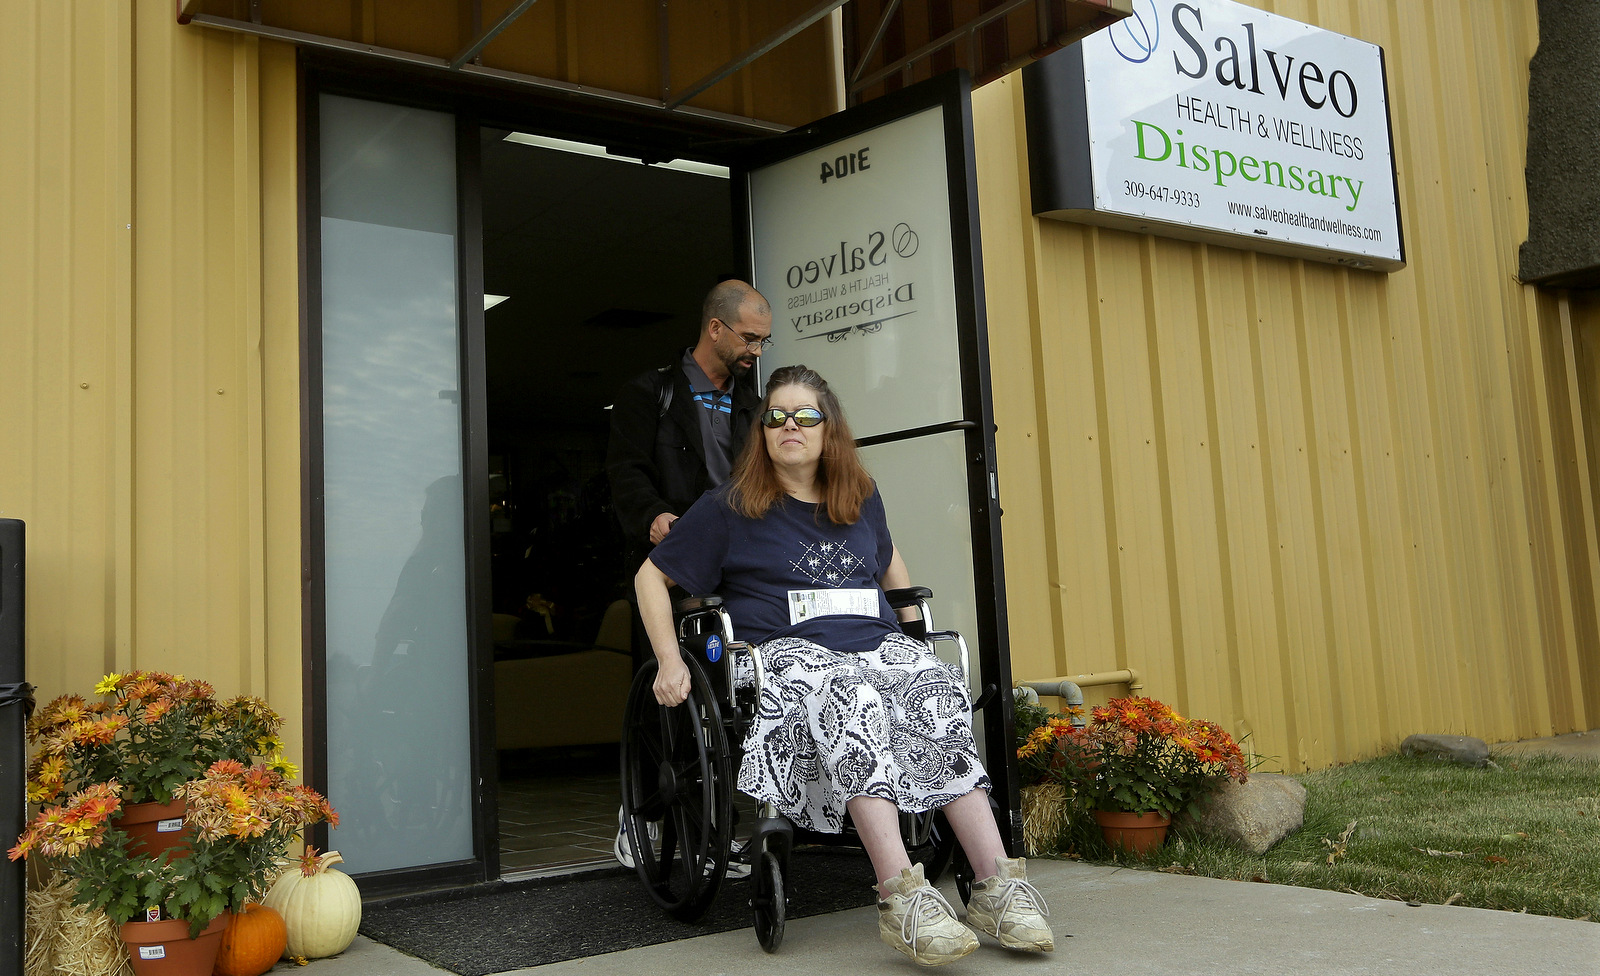 Shamay Flaharty, of Lewiston, Ill., who has multiple sclerosis and is hoping cannabis will help ease her pain and headaches, leaves with Eric Sweatt, partner and manager of Salveo Health and Wellness. (AP Photo/Seth Perlman)